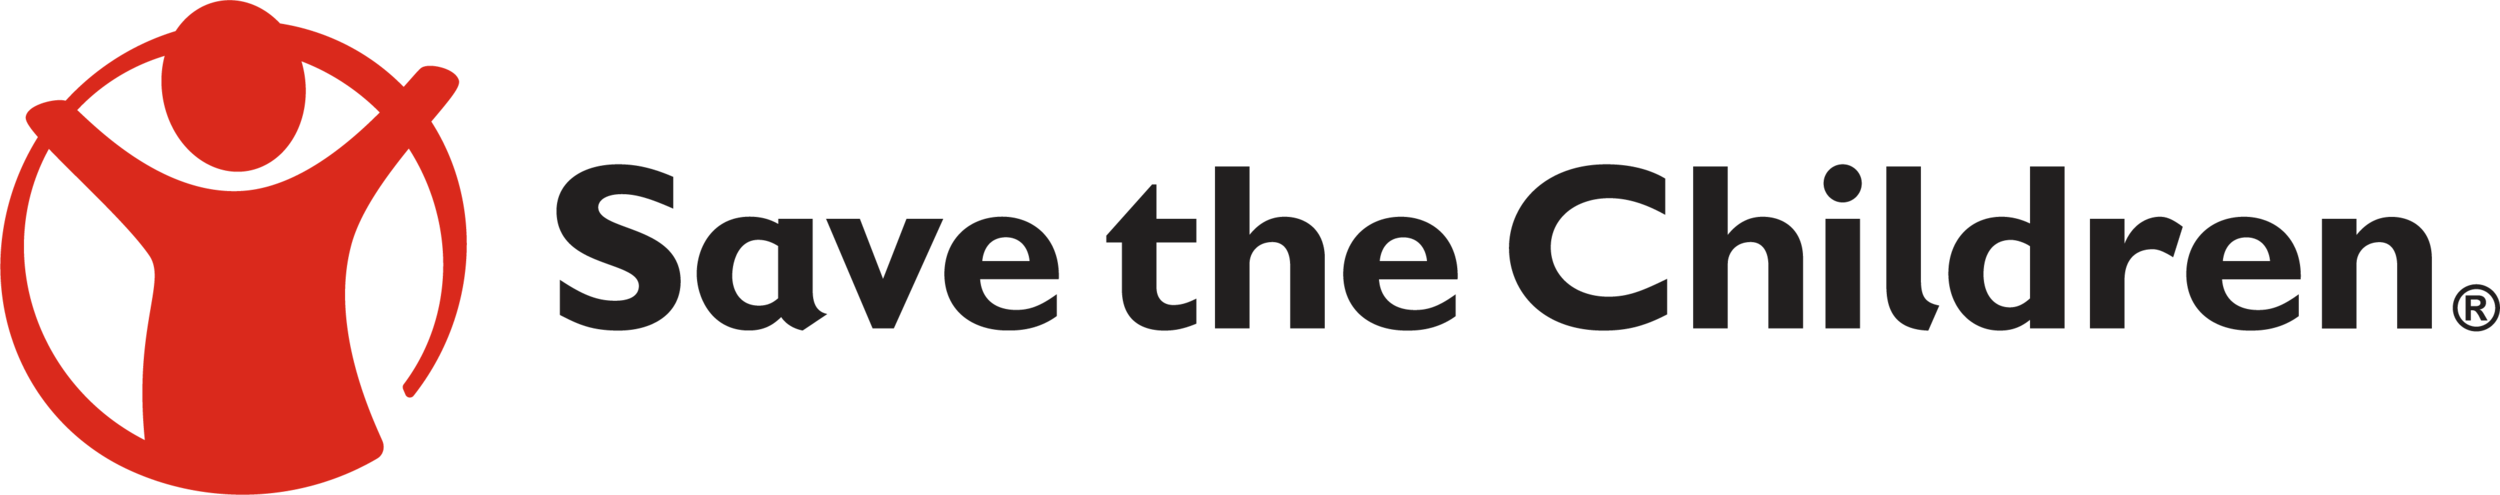 Save the children logo.png